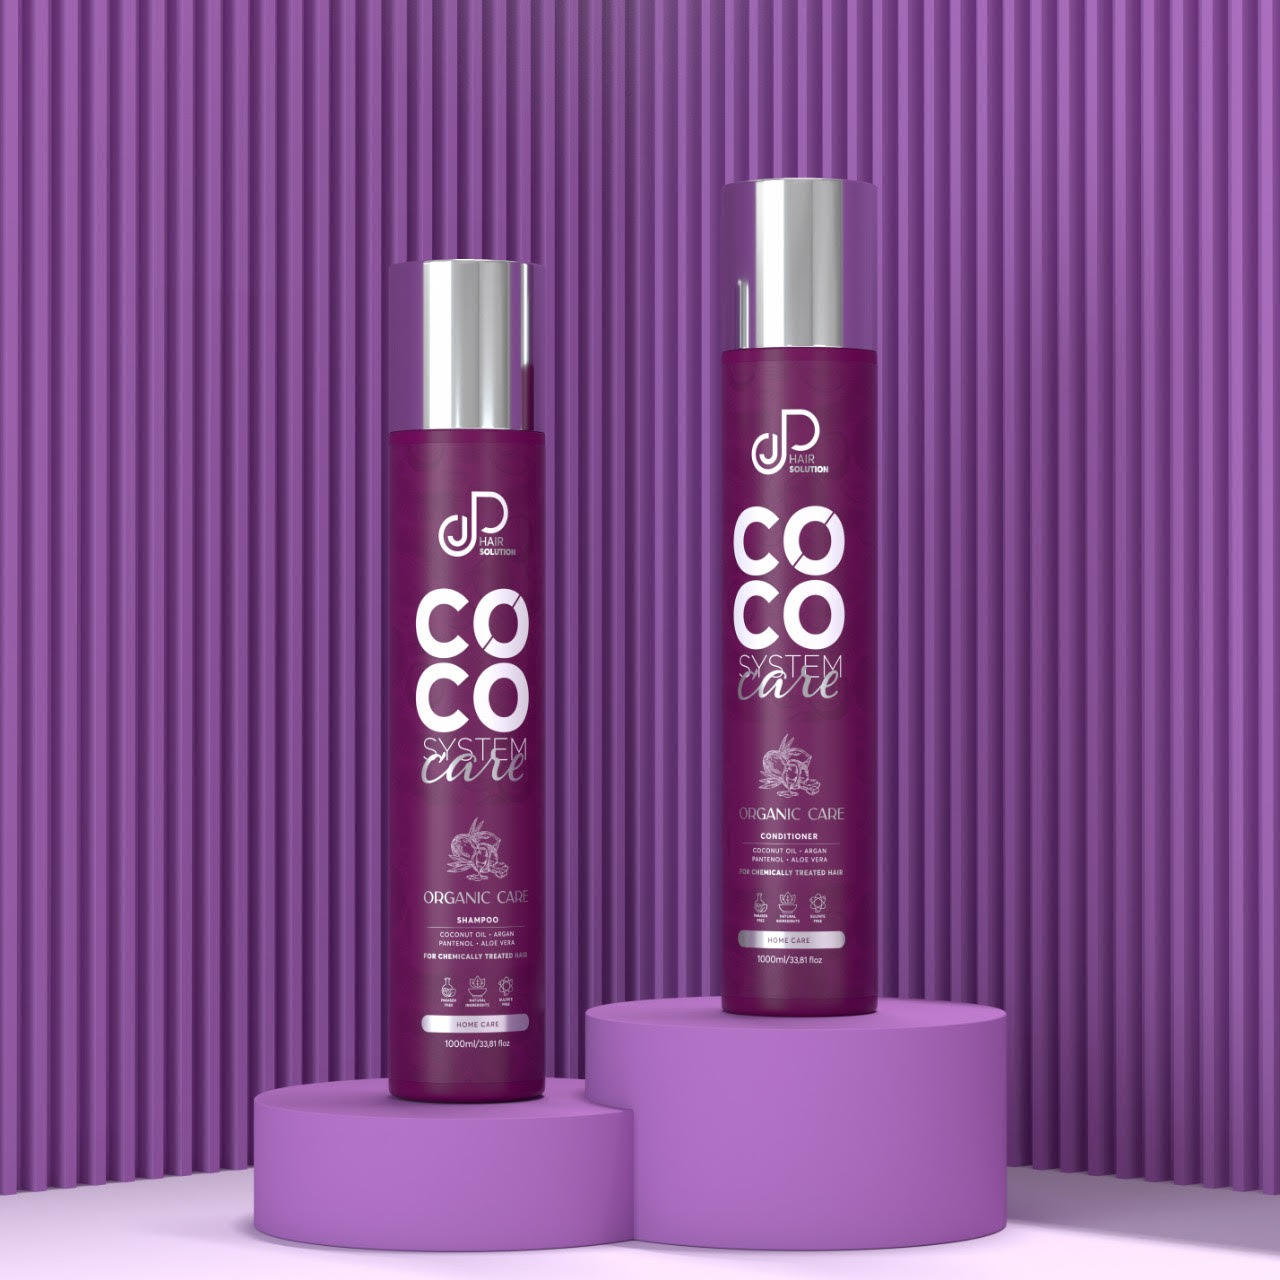 Coco System Shower Package